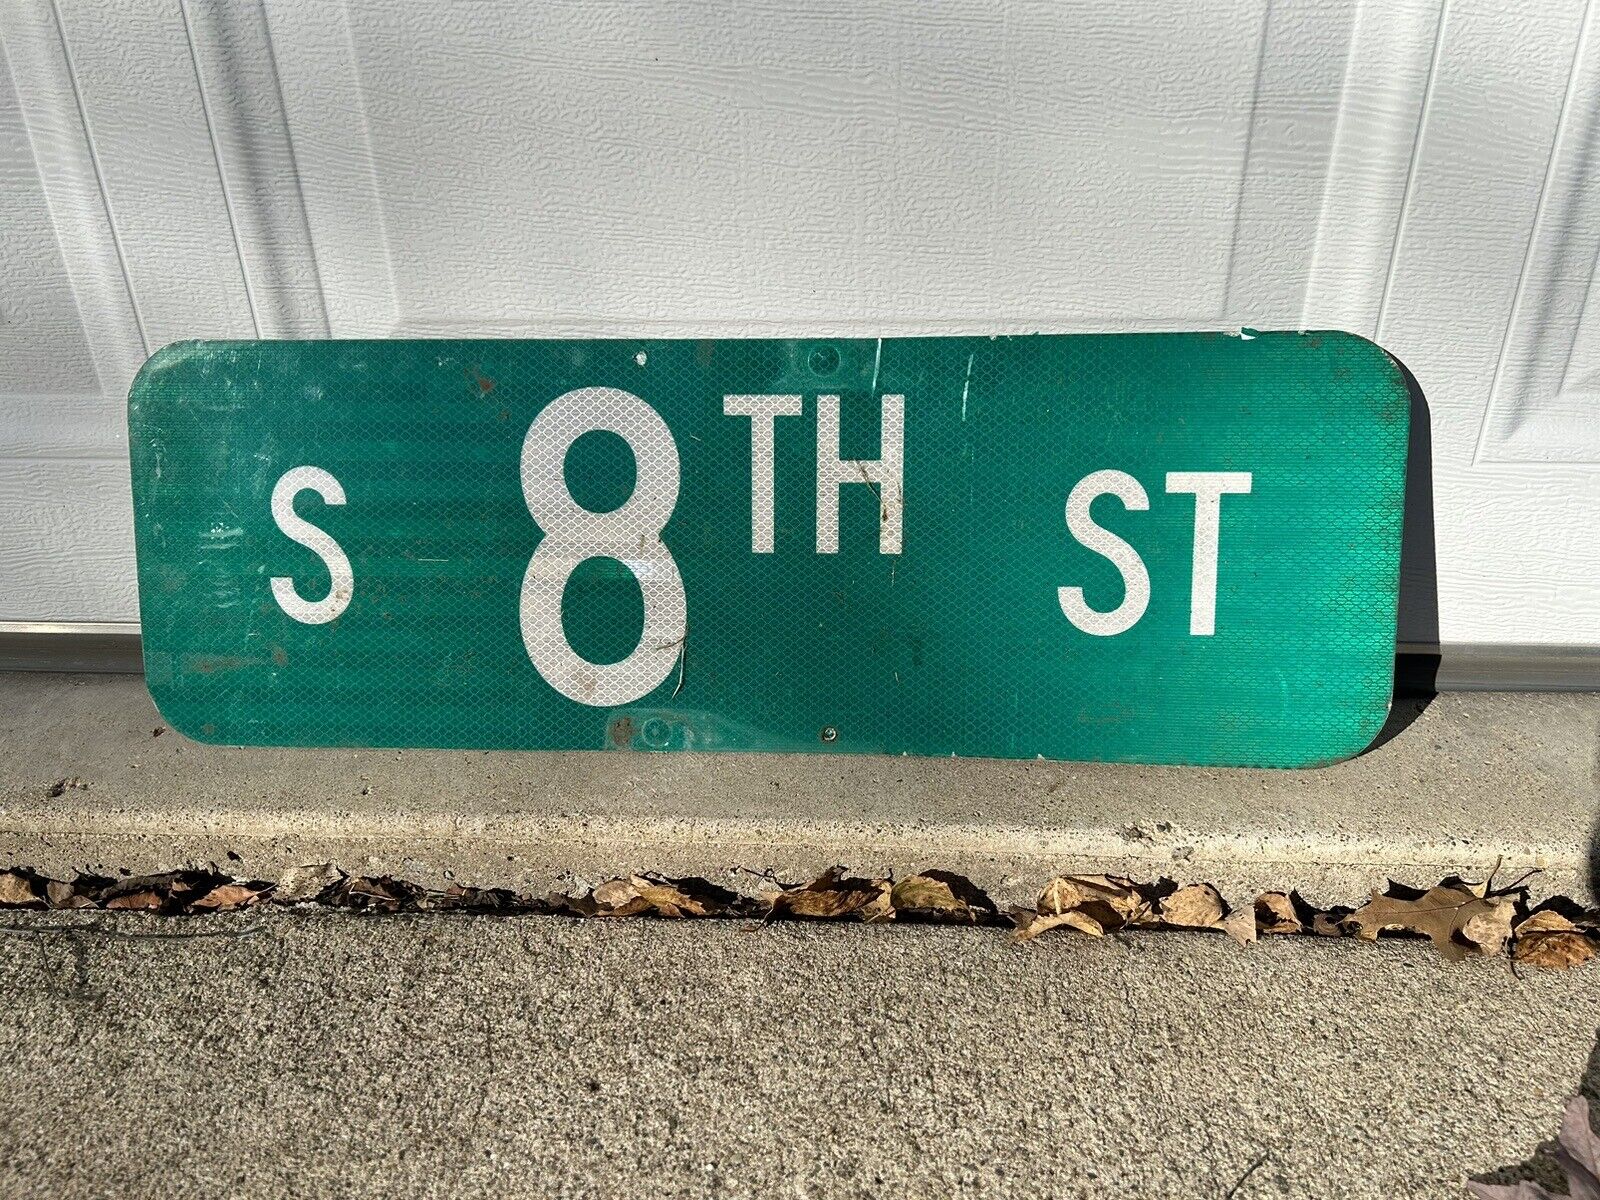 Retired Reflective Aluminum Street Sign S 8th Street  24 X 8 inches South Eighth